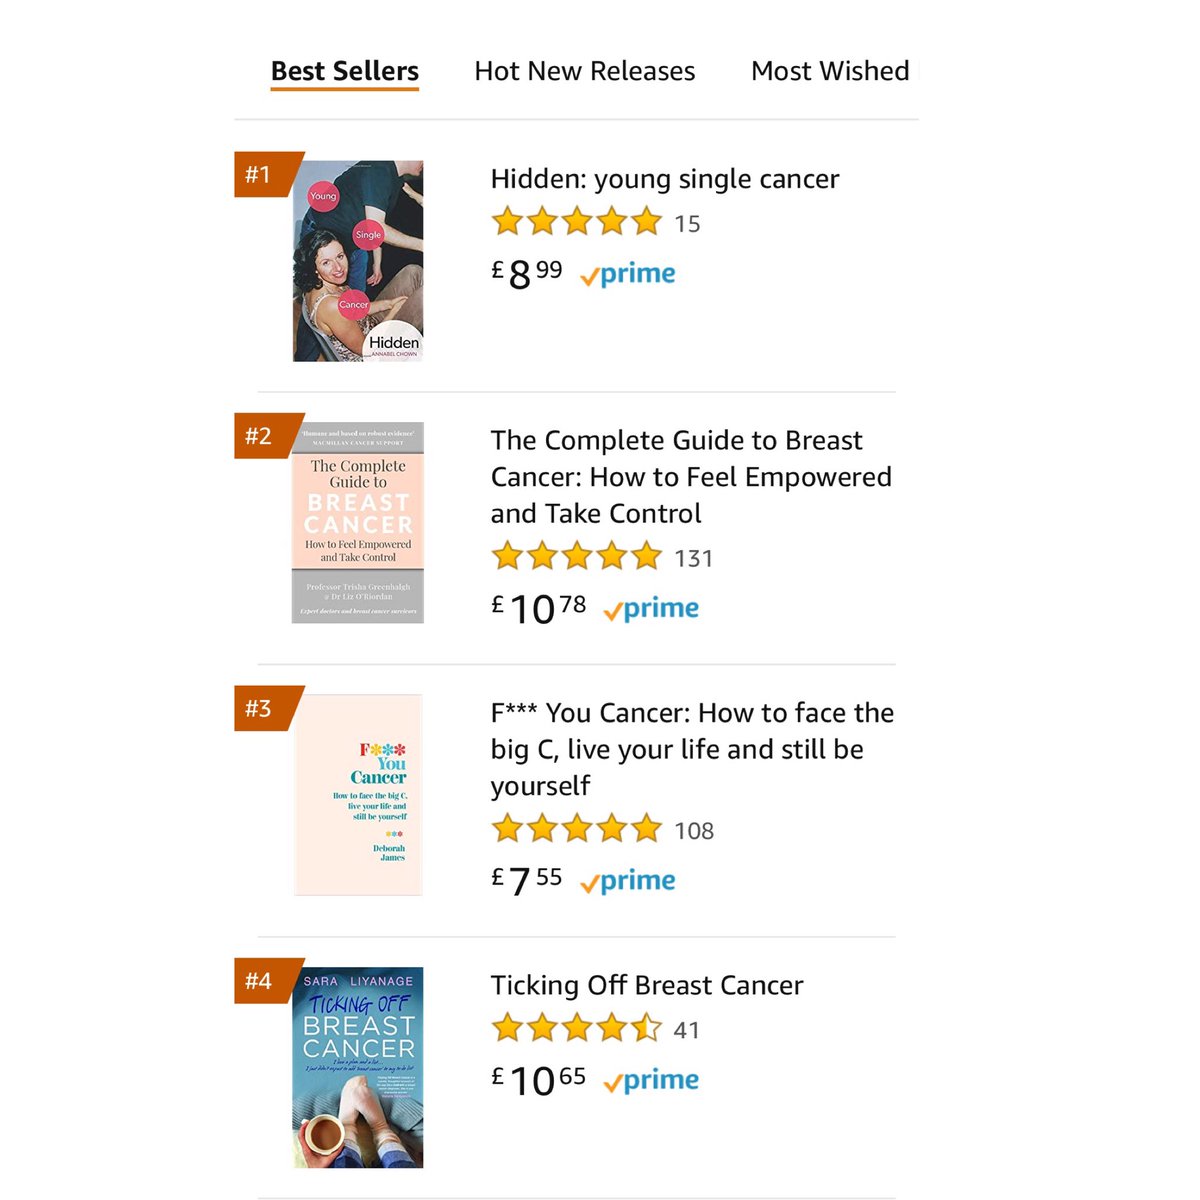 Very excited to be back in the Amazon top 5 breast cancer best sellers today. This has really made my day/week/month. Thank you so much for buying it 😊🙏🏻💕

#breastcancer #cancer #tickingoffbreastcancer #cancersupport #breastcancersupport